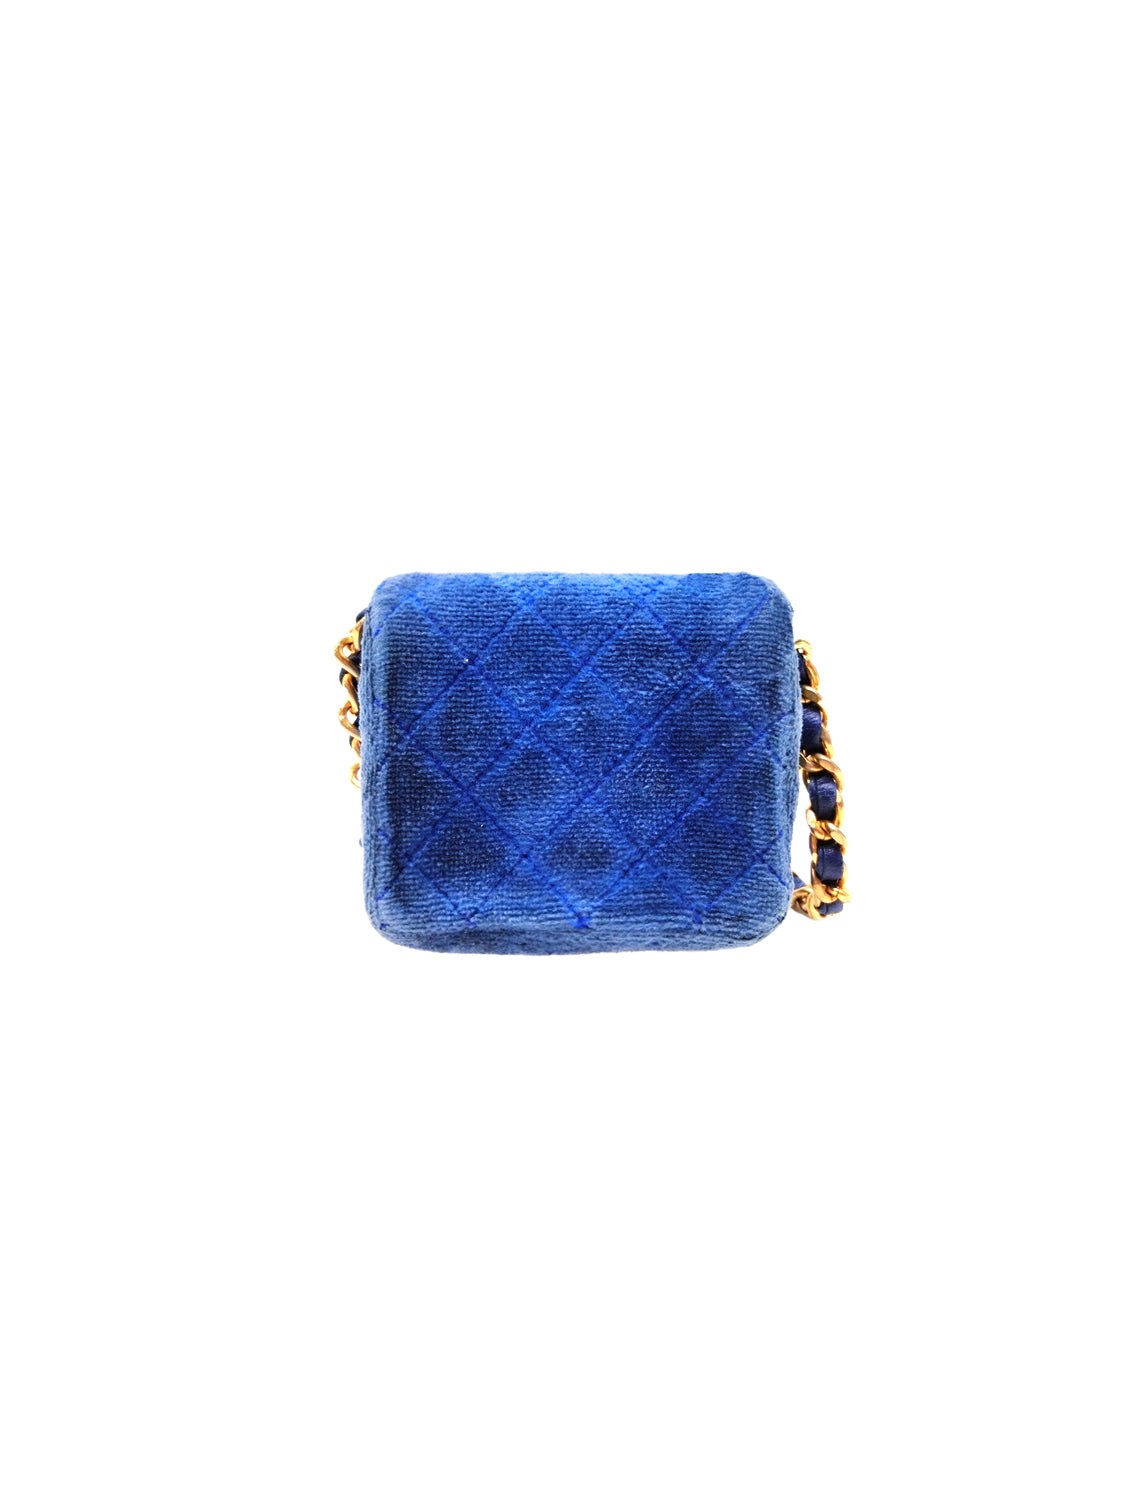 Chanel 2000s Blue Terrycloth Mini Square Flap